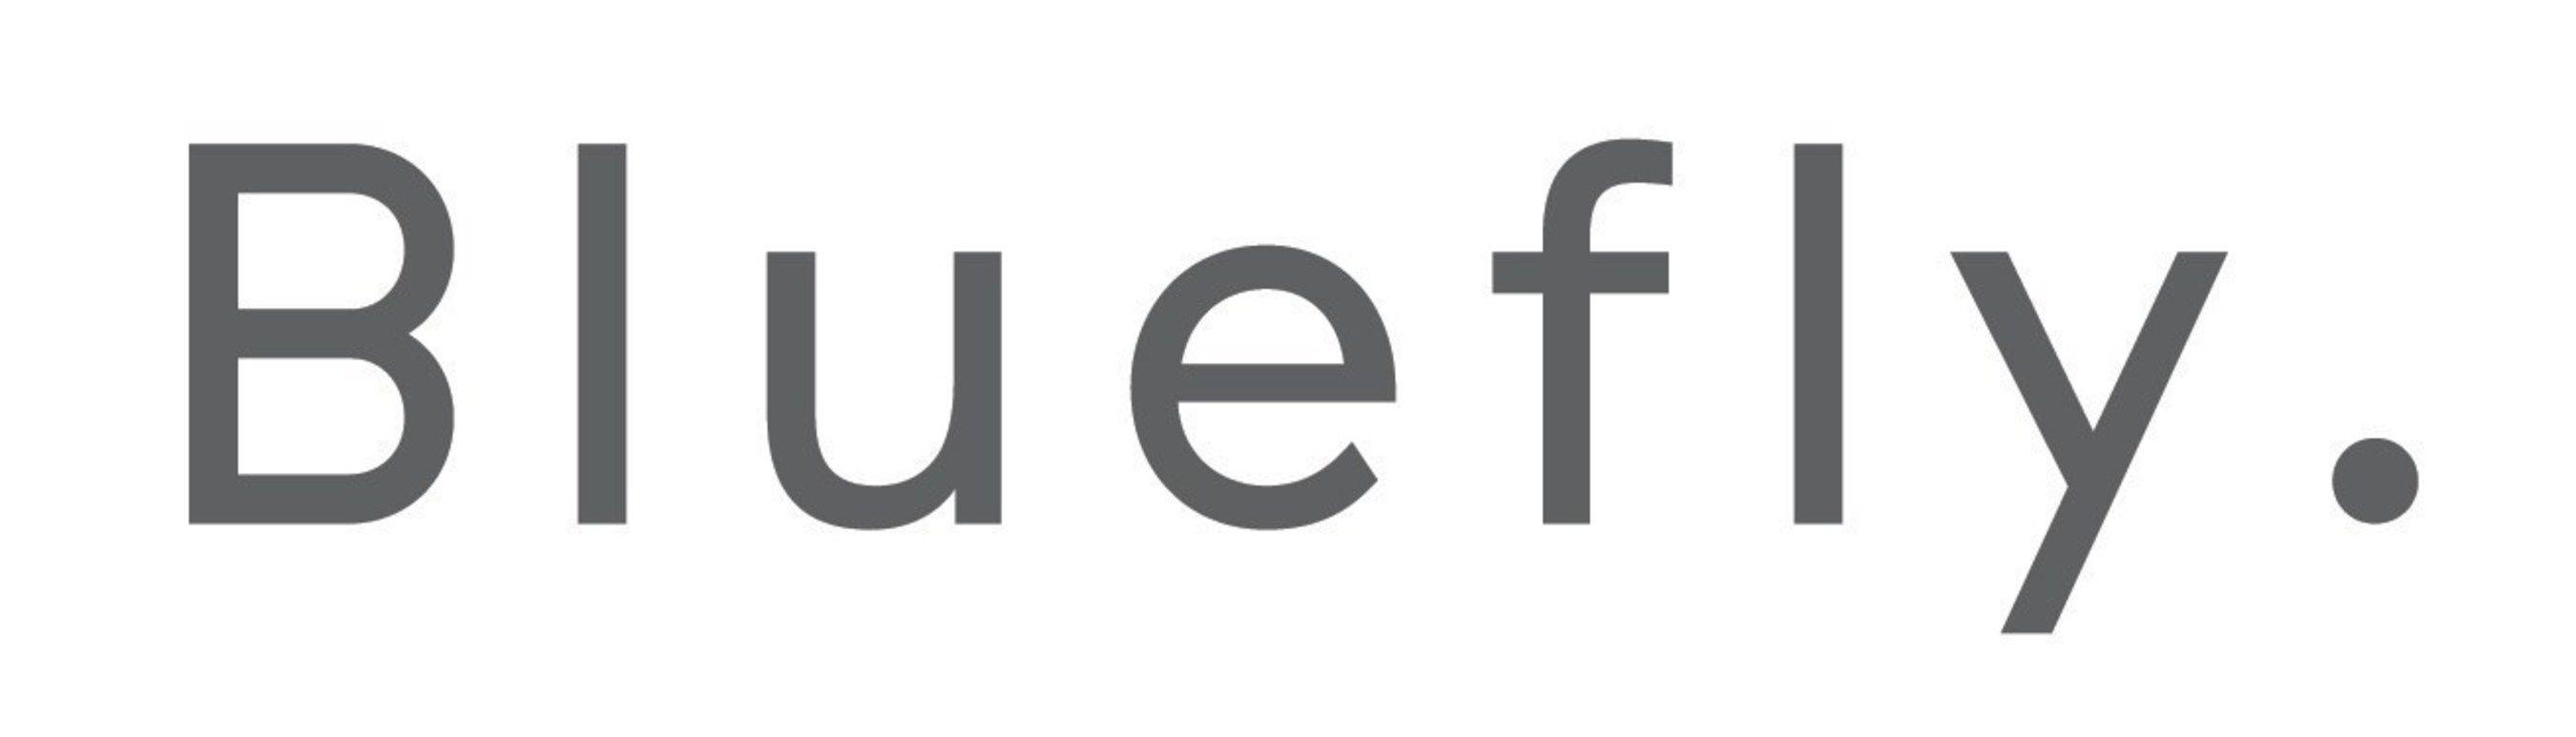 BLUEFLY Logo - Bluefly Debuts a Fresh Look, Introducing New Logo, Branding and Platform